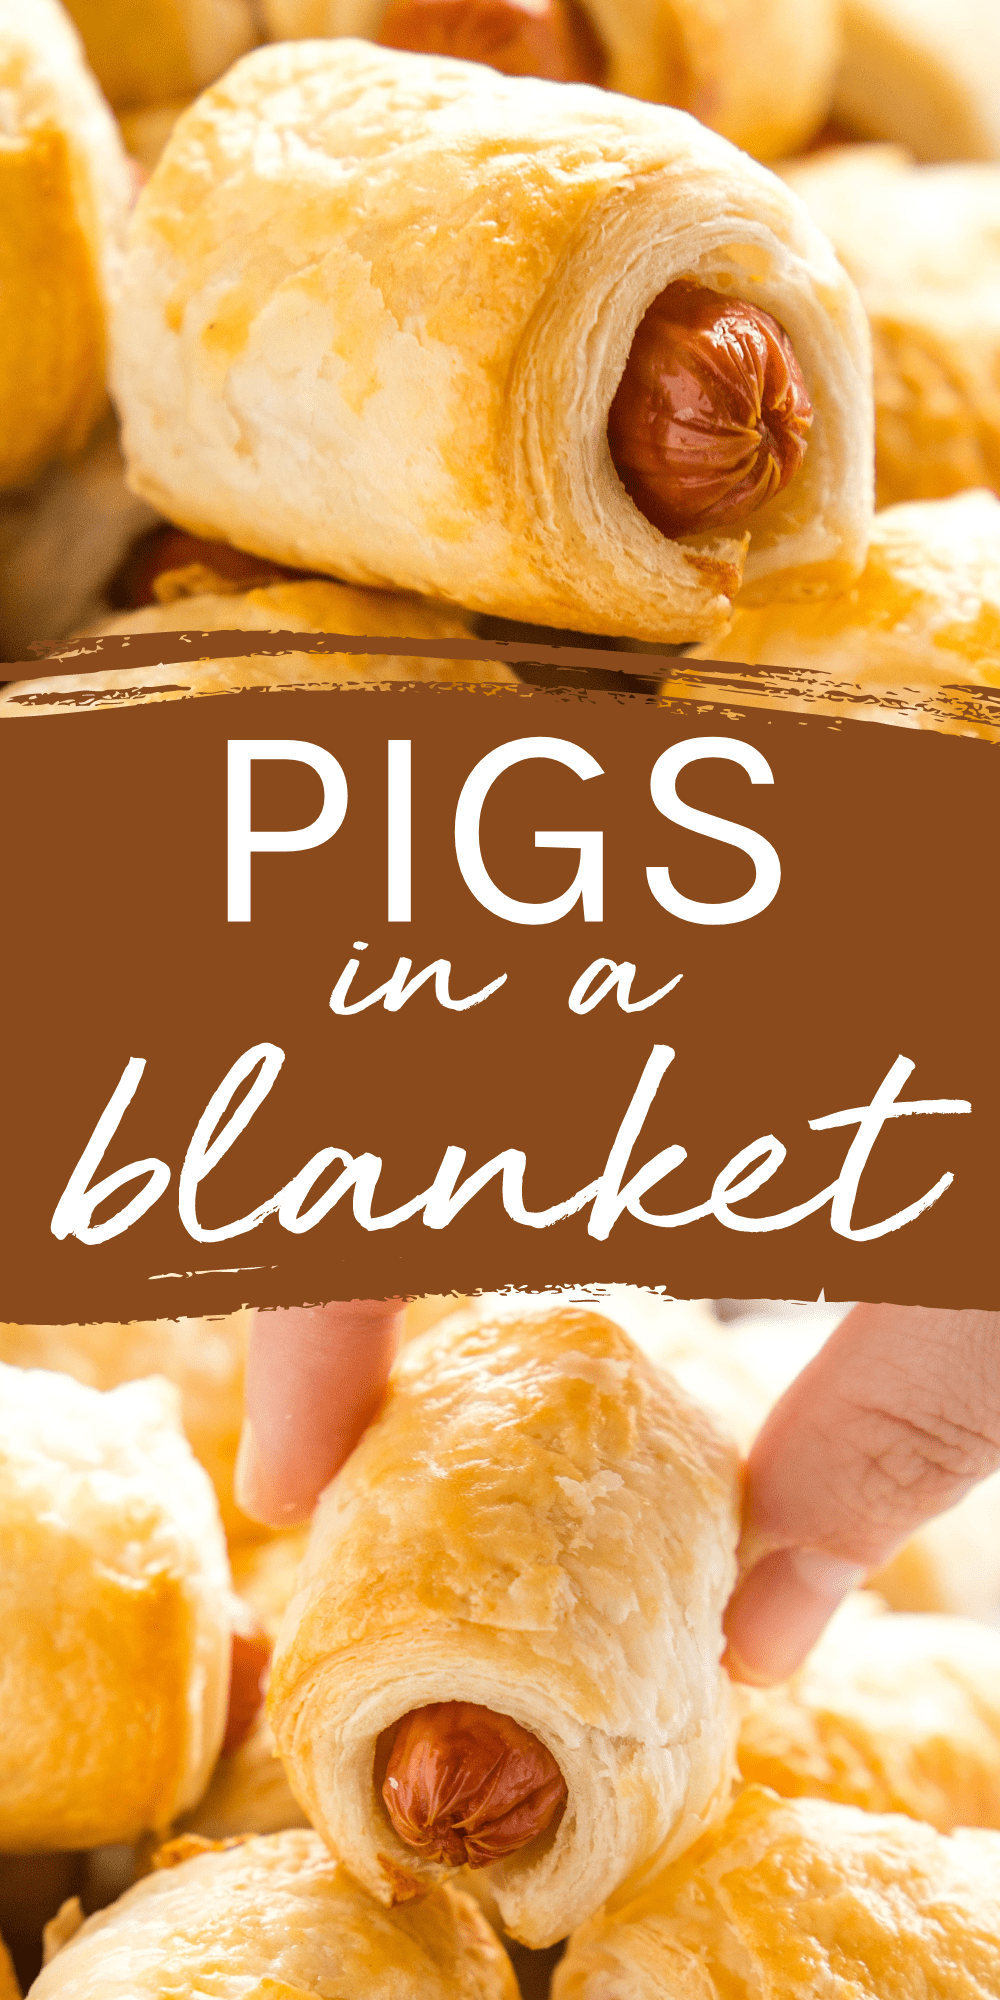 This Pigs in a Blanket recipe is an easy game-day appetizer made with cocktail wieners and puff pastry. Easy to make and the perfect snack for parties. Ready in under 30 minutes! Recipe from thebusybaker.ca! #pigsinablanket #sausagerolls #partyappetizer #gamedayappetizer #appetizer #snack #partyfood via @busybakerblog